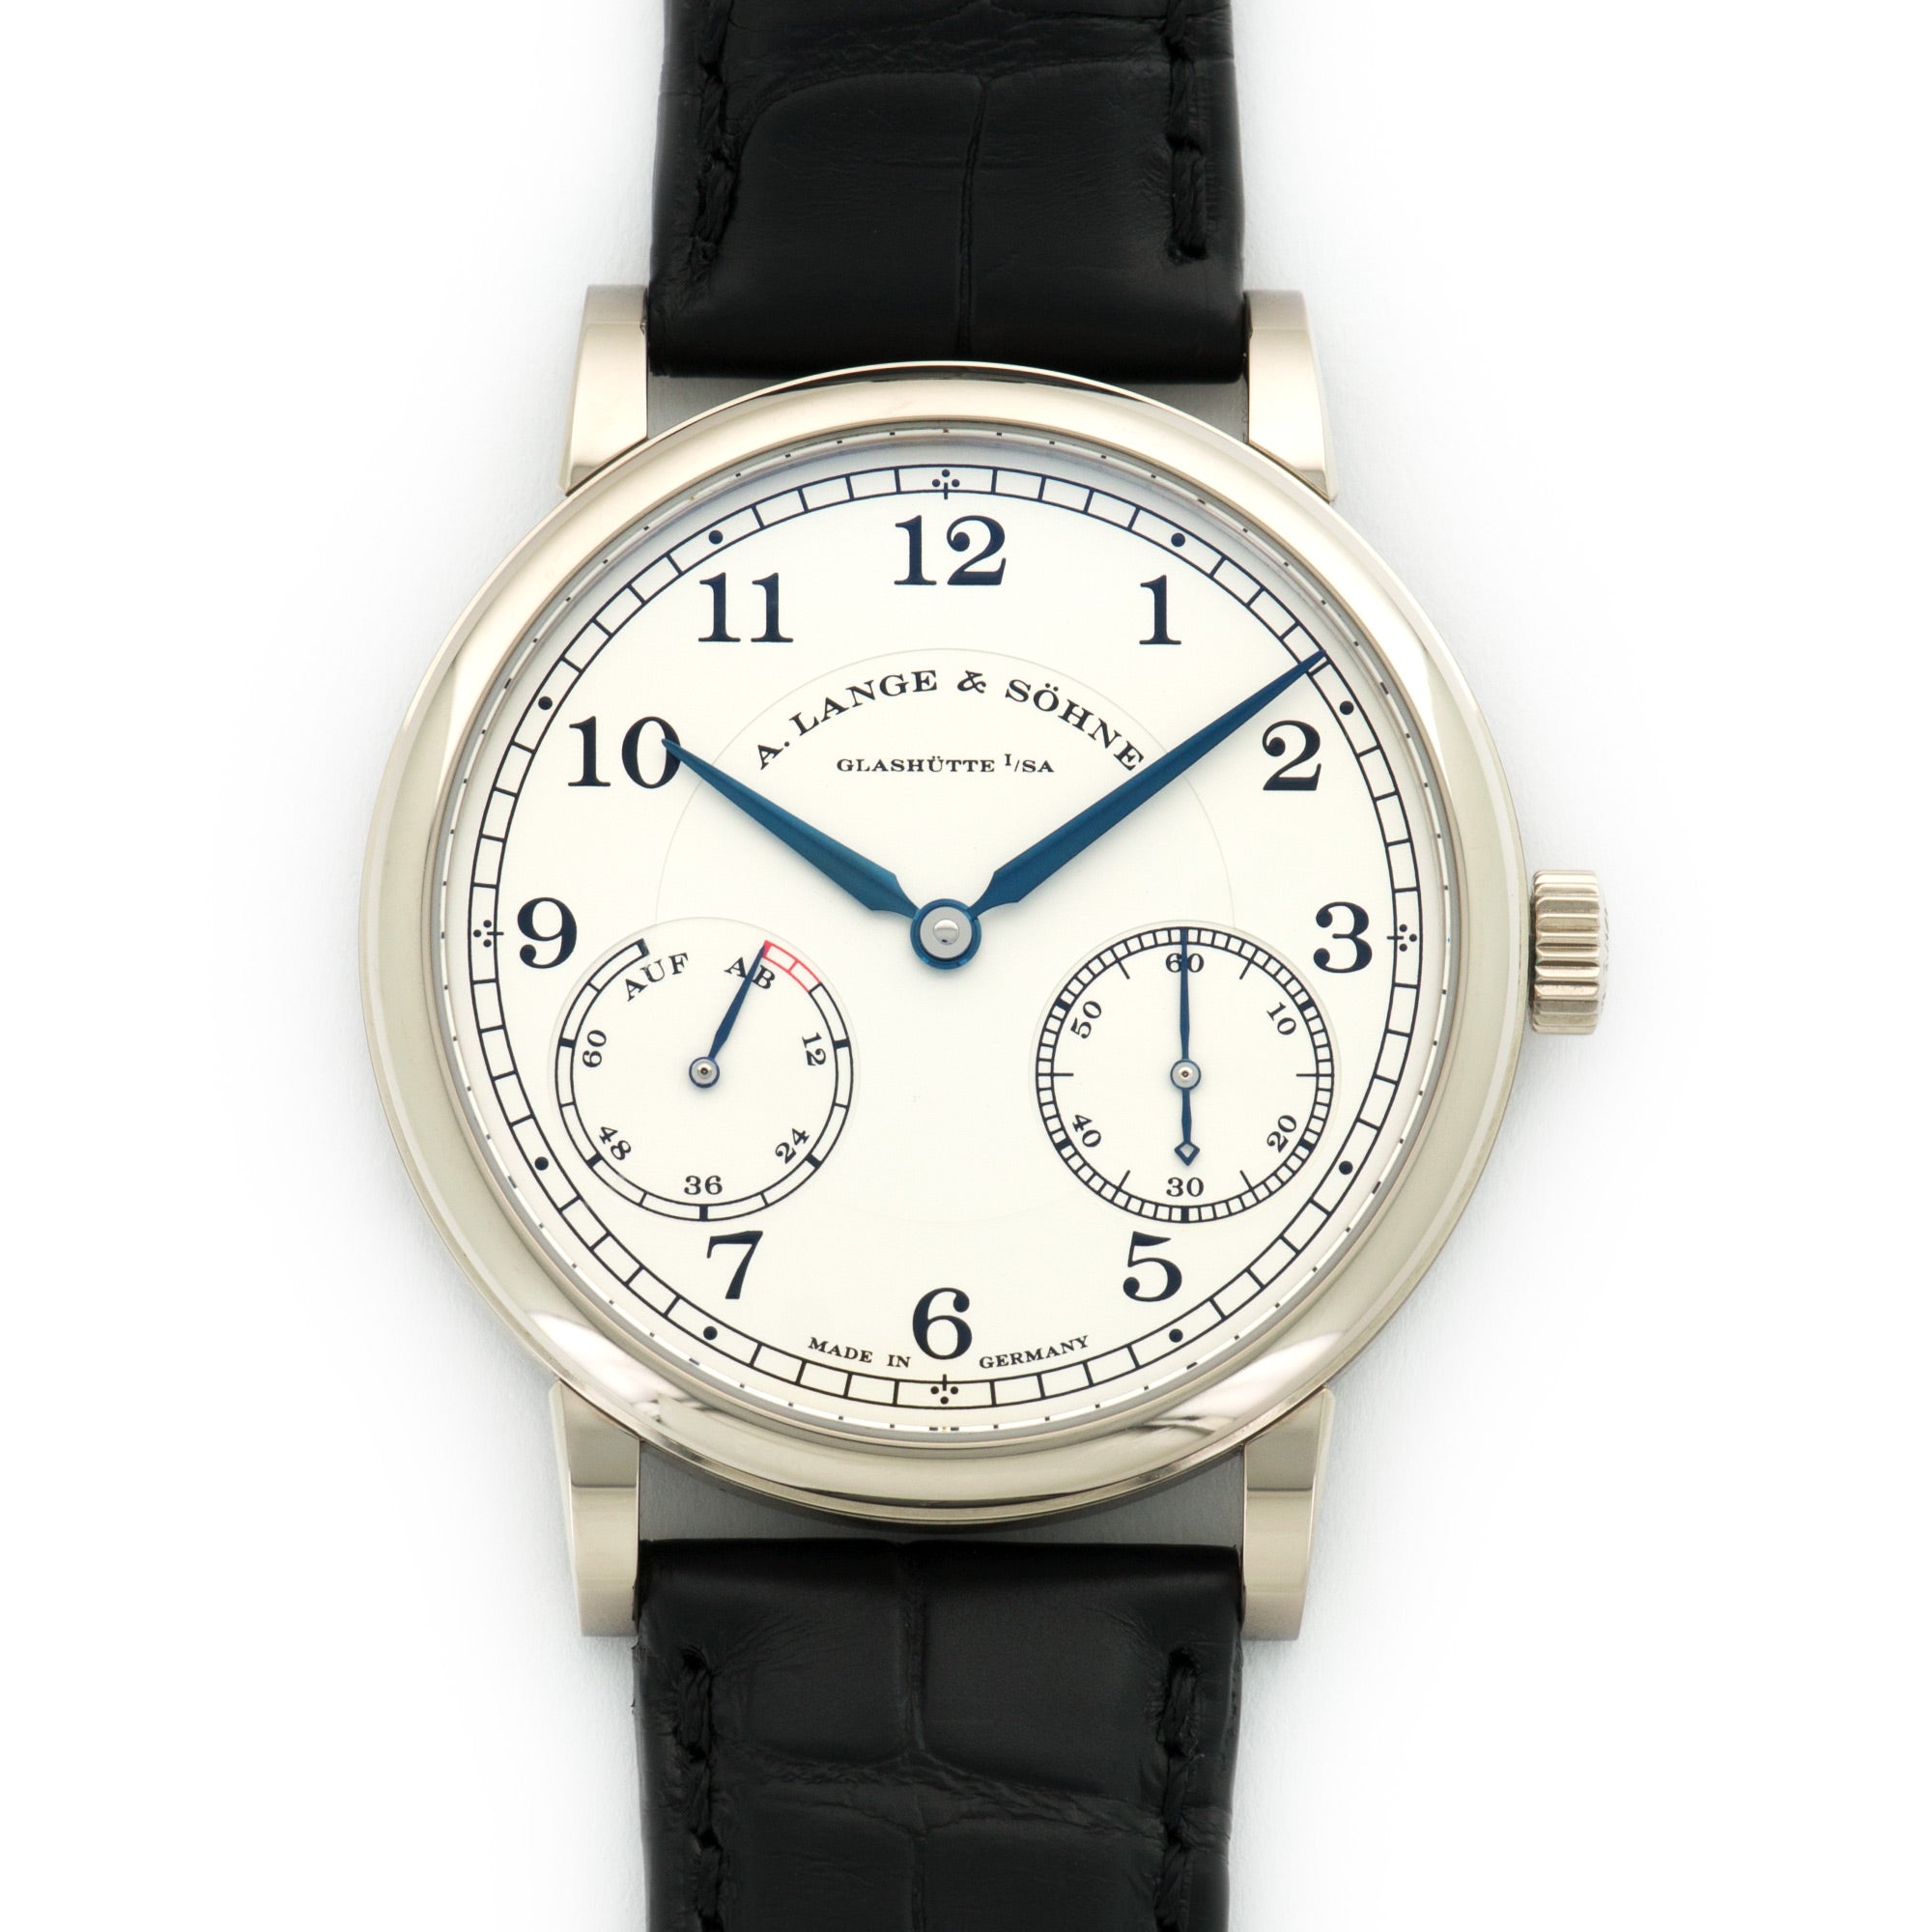 A. Lange &amp; Sohne - A. Lange &amp; Sohne White Gold 1815 Up Down Watch Ref. 234.026 - The Keystone Watches